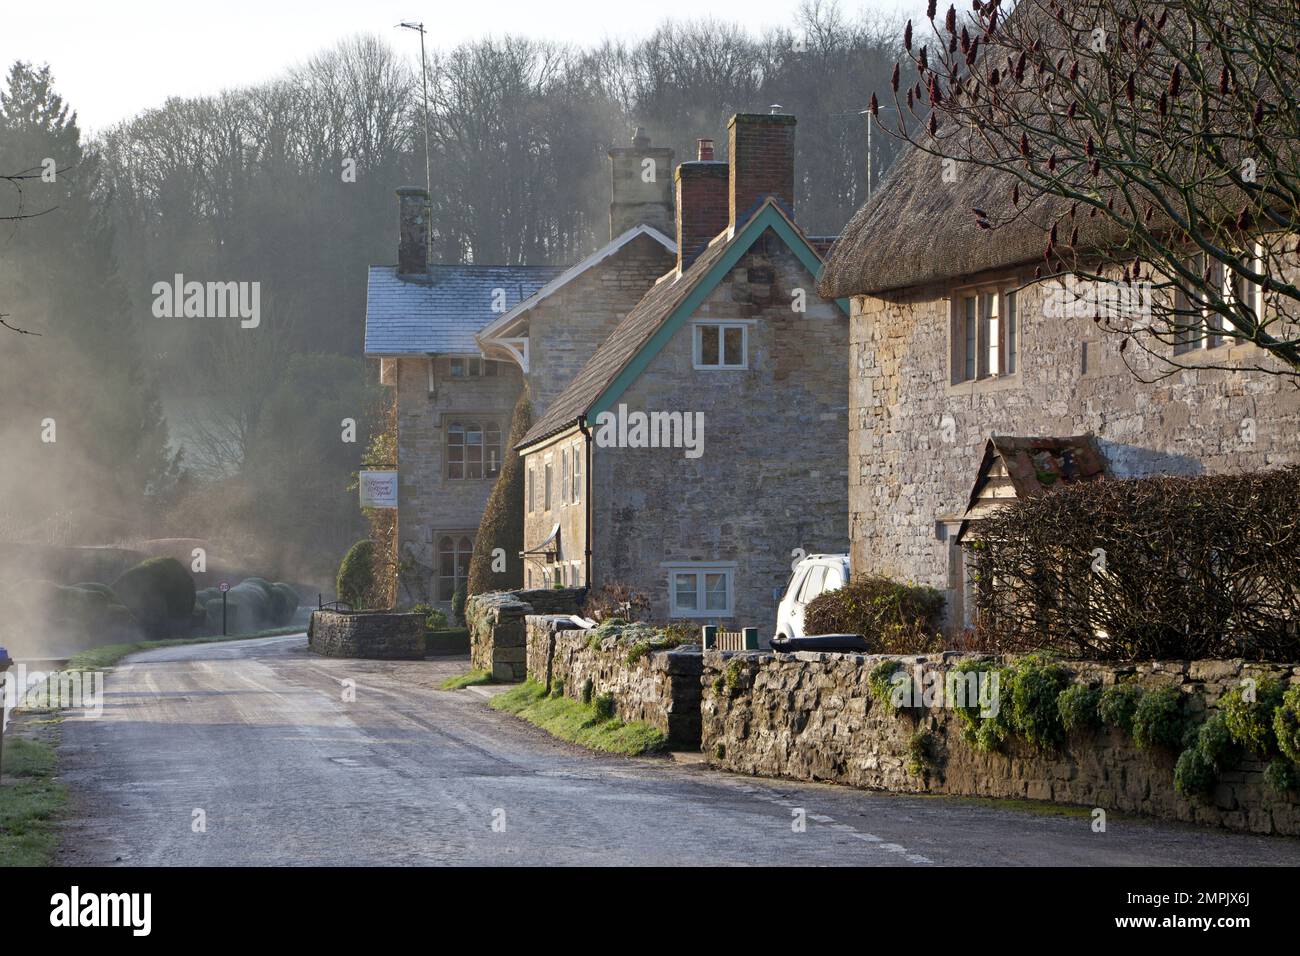 Cottages in the village of Teffont Evias in Wiltshire. Stock Photo